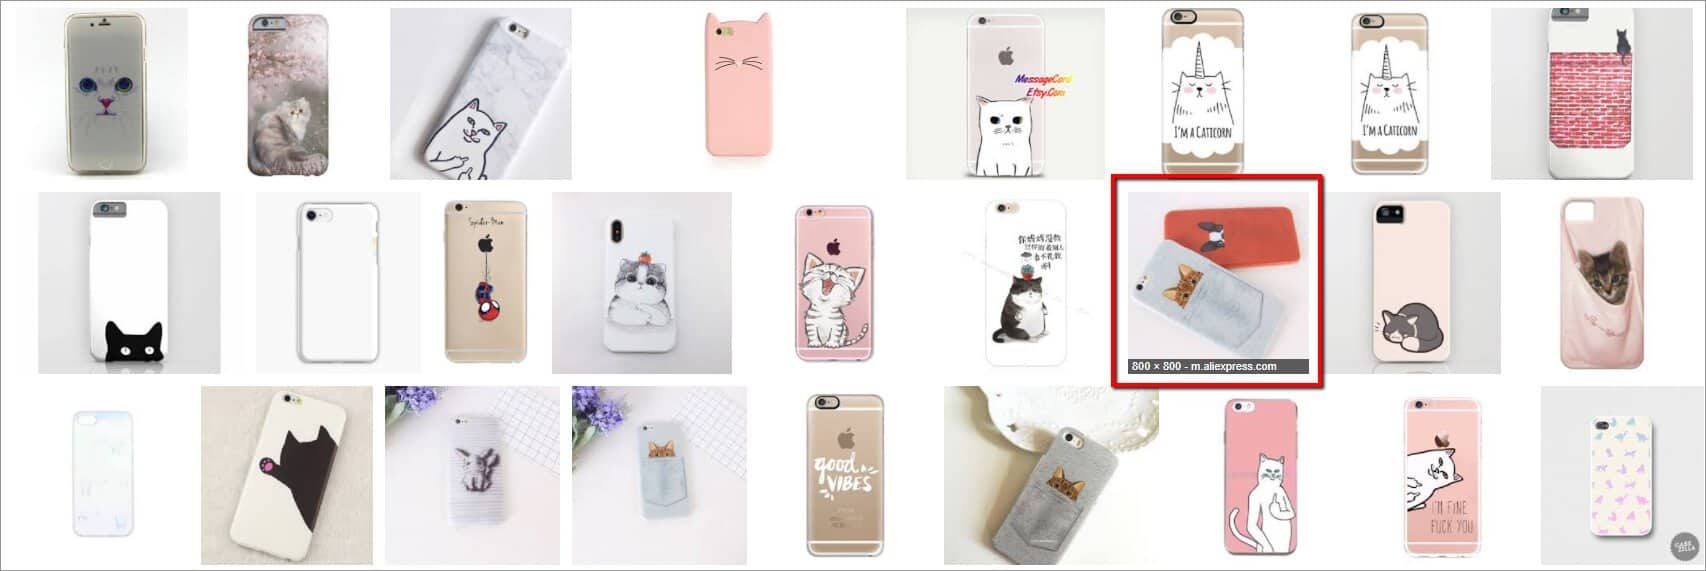 Detailed search results showing images of cat in a pocket iPhone cases 